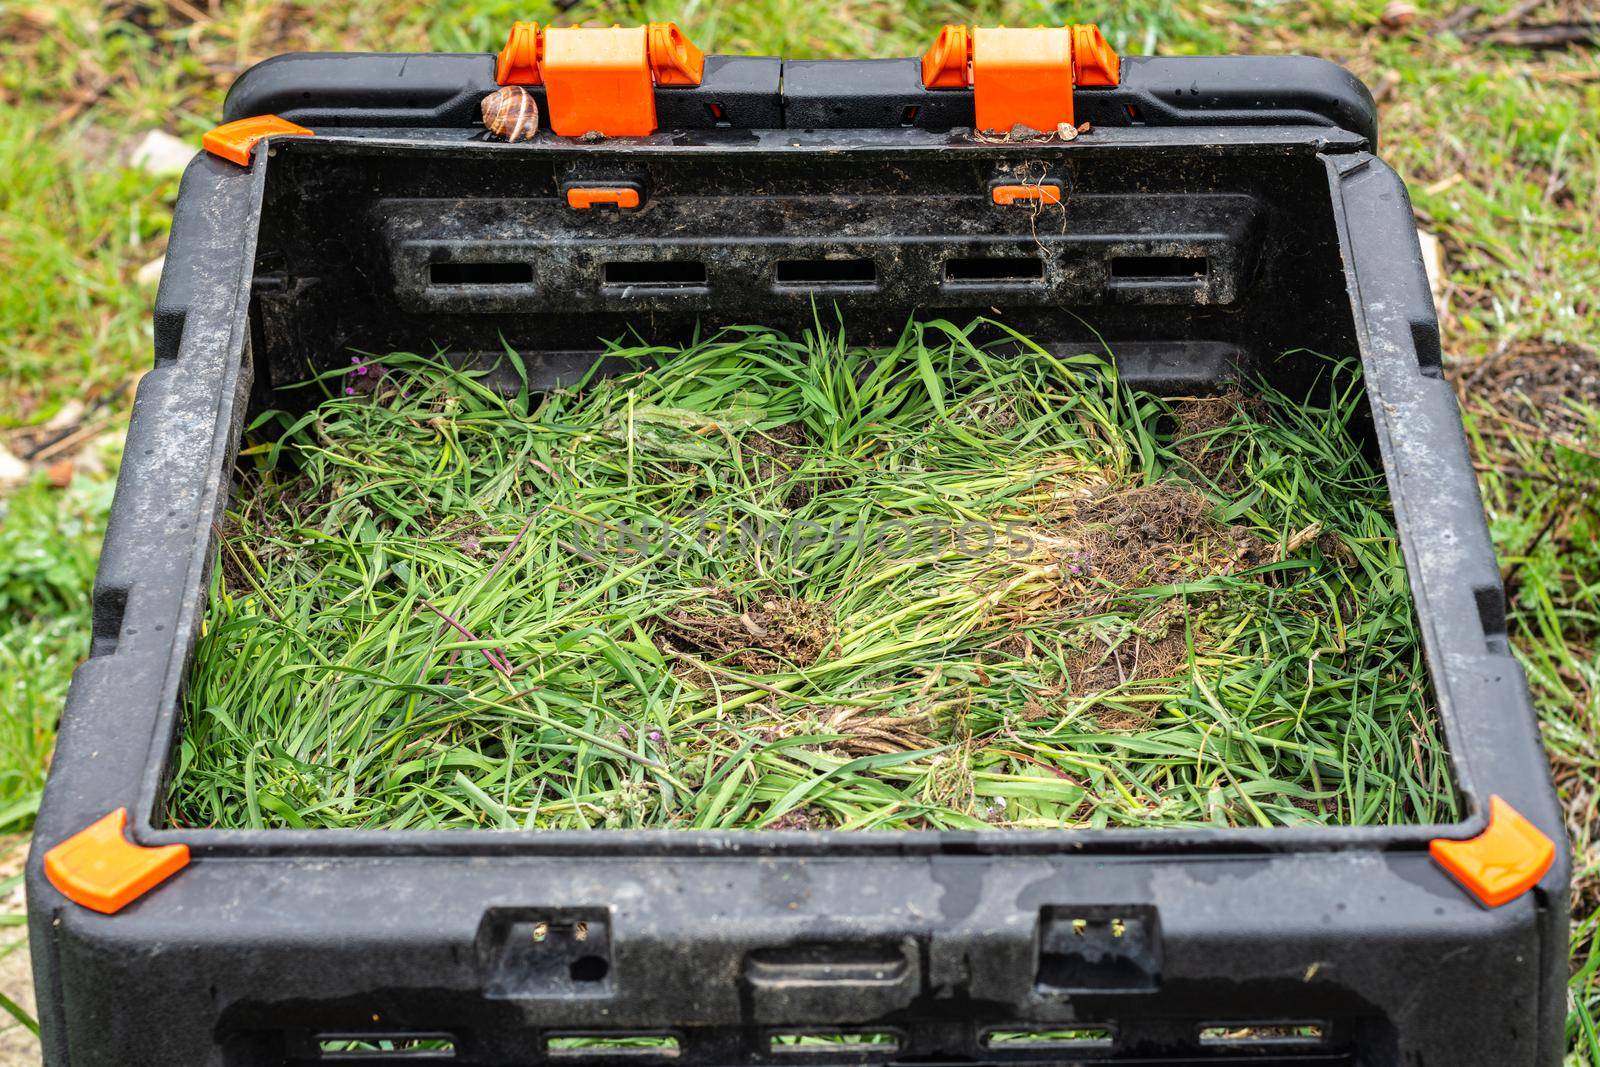 Freshly cut weeds in a plastic composter a